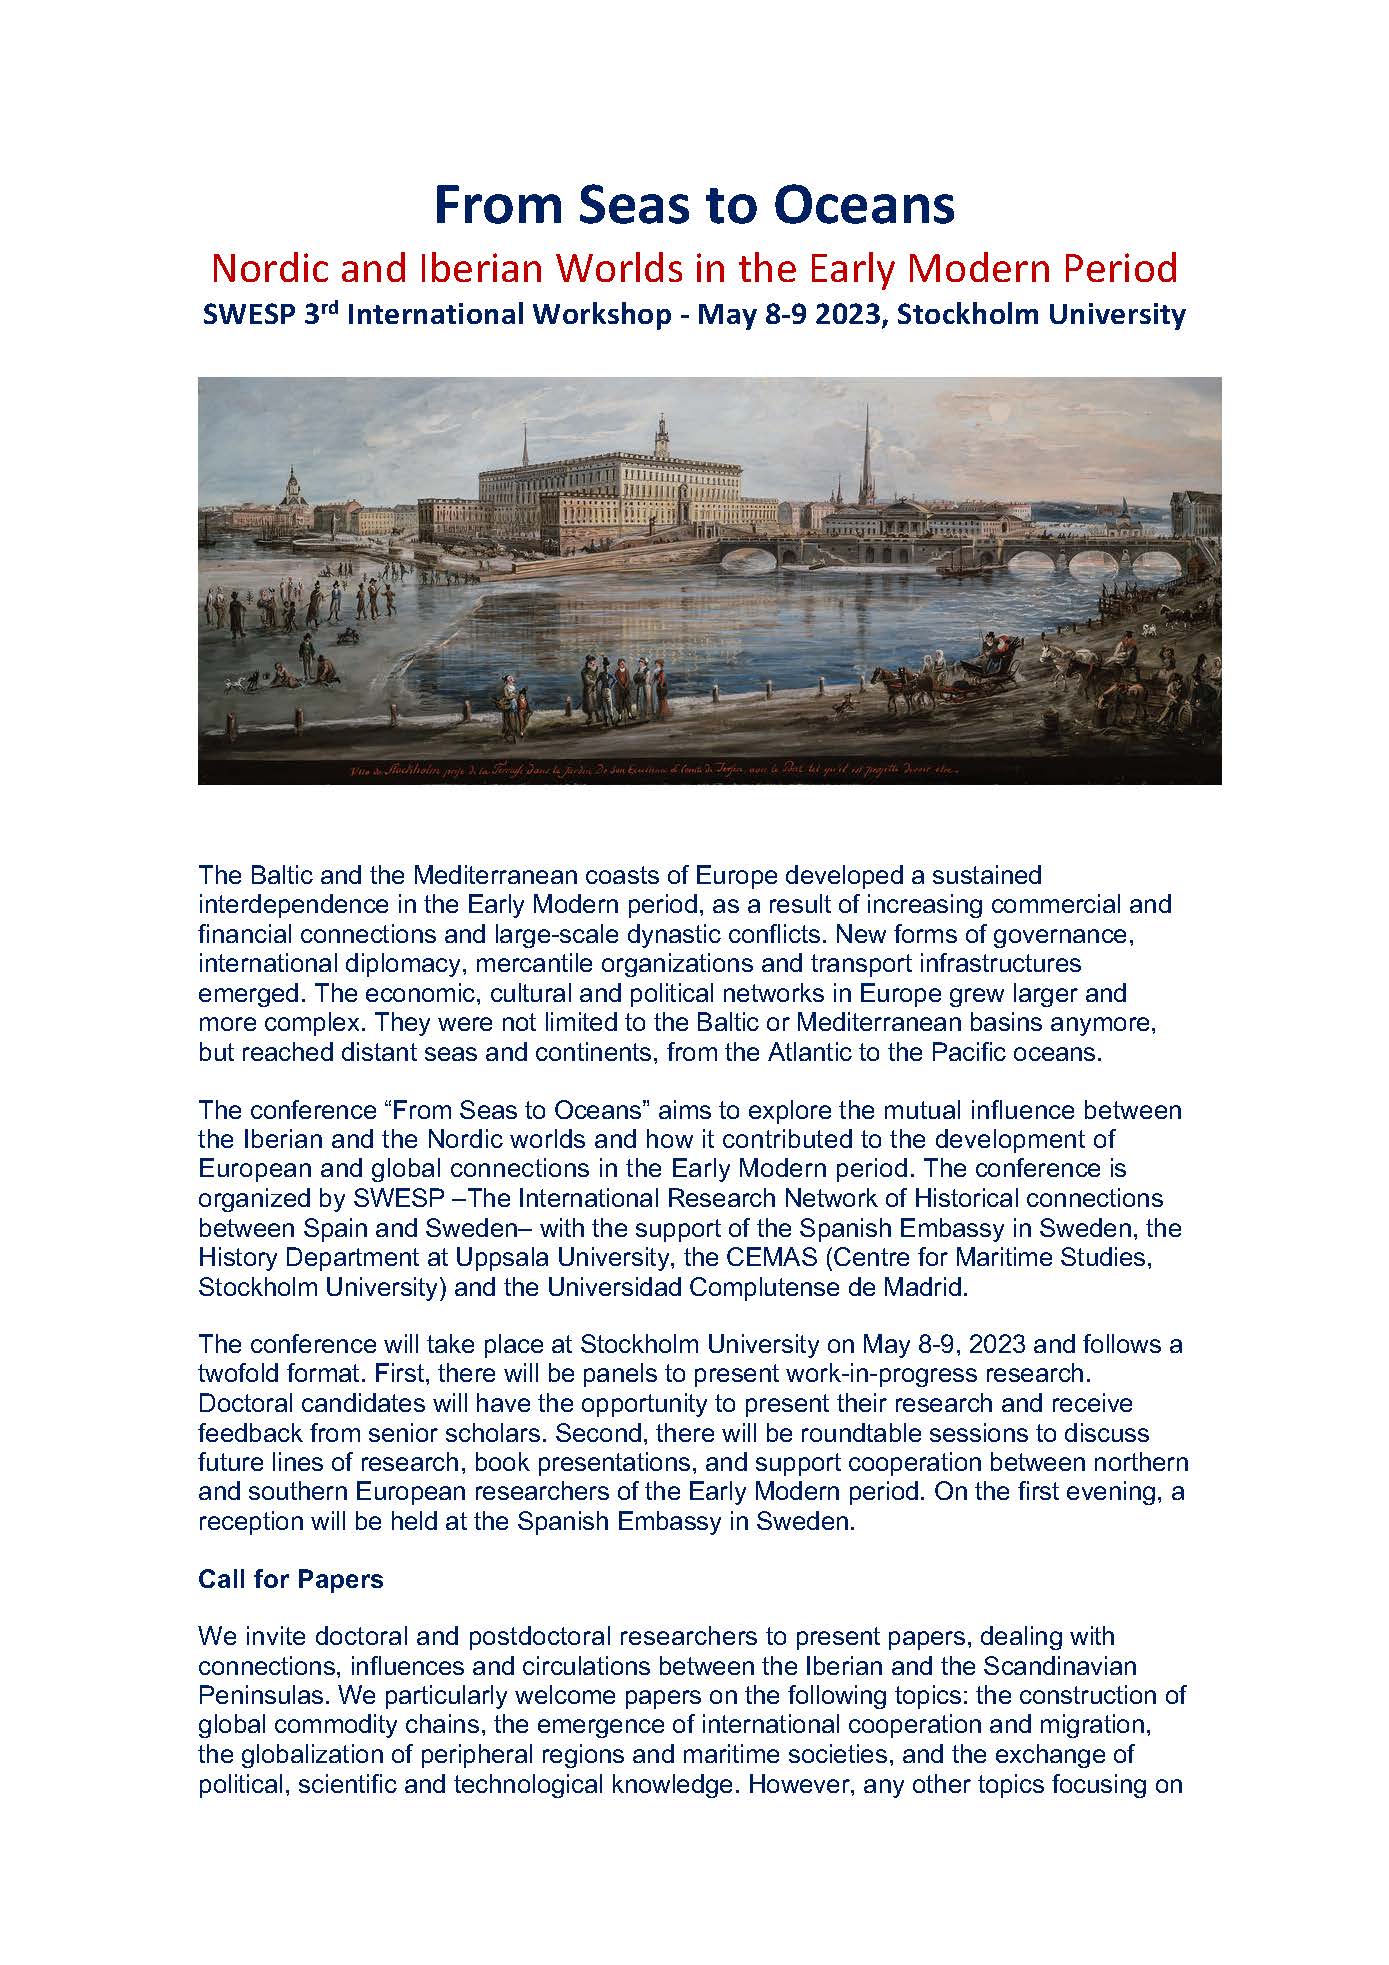 CALL FOR PAPERS: From Seas to Oceans. Nordic and Iberian Worlds in the Early Modern Period. - May 8-9 2023, Stockholm University